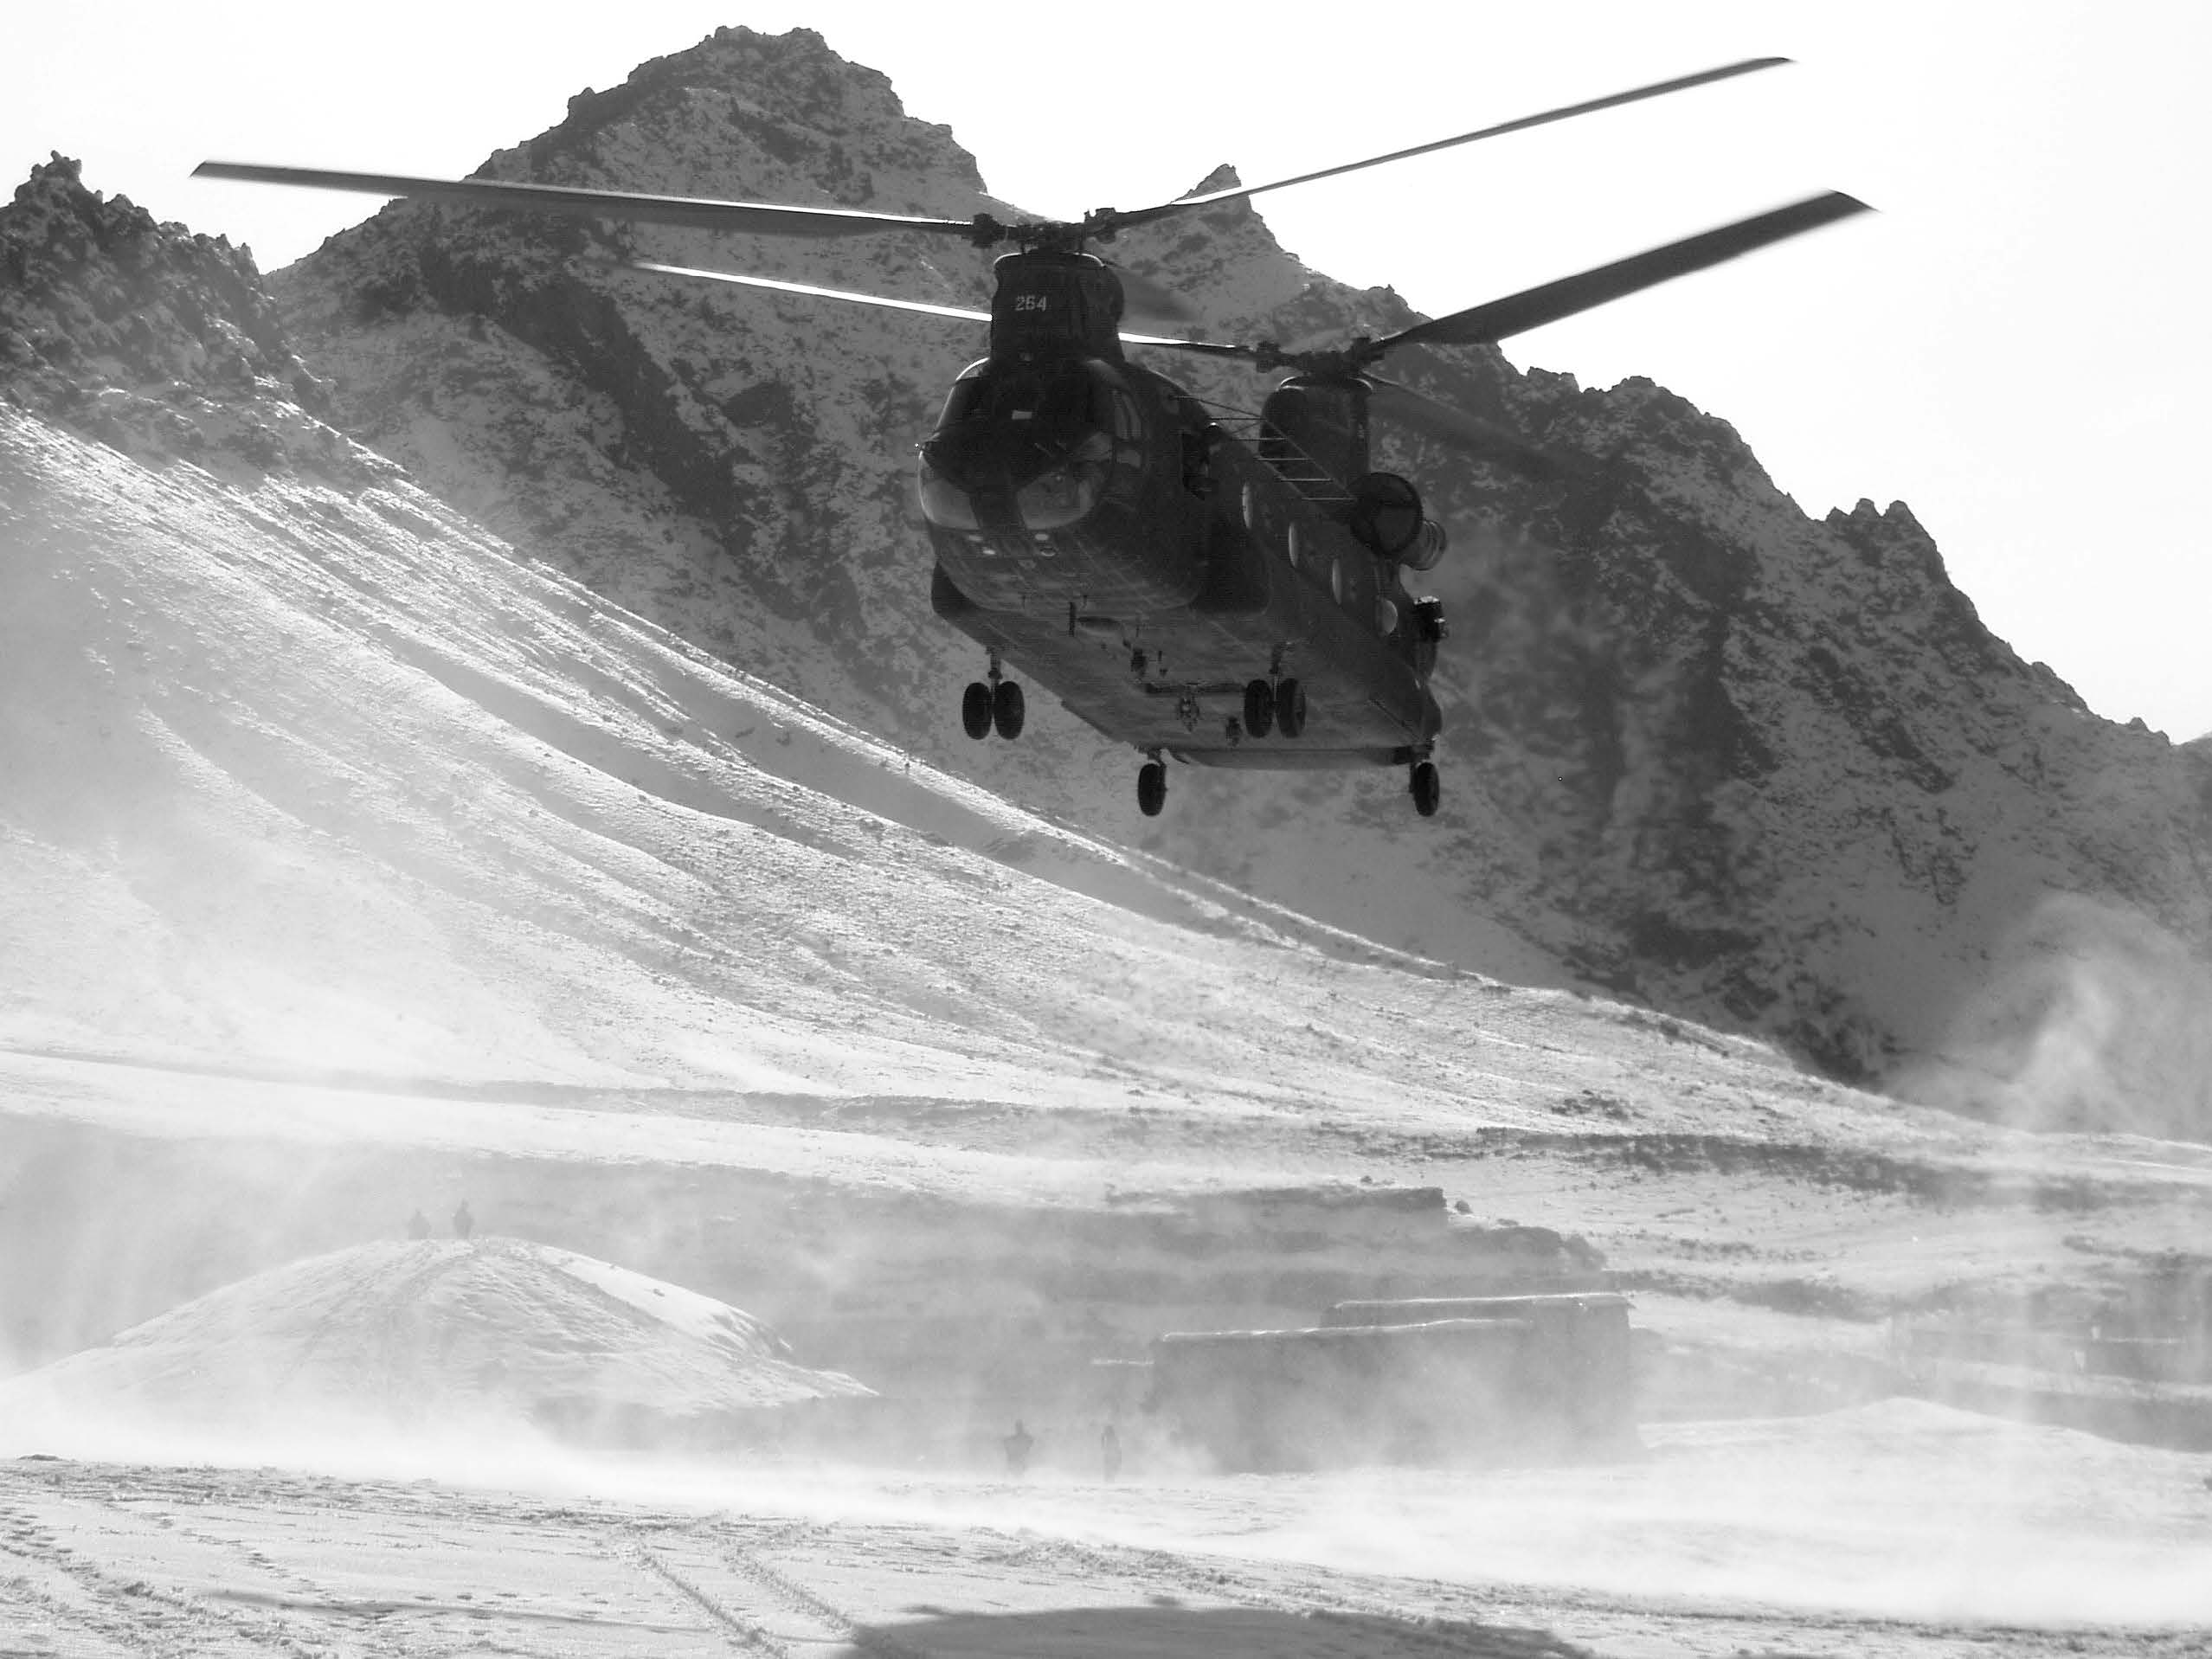 A Chinook helicopter coming in to pick up an element of Colby Jenkin’s Special Forces team following an operation in February 2005. Courtesy of Colby Jenkins.